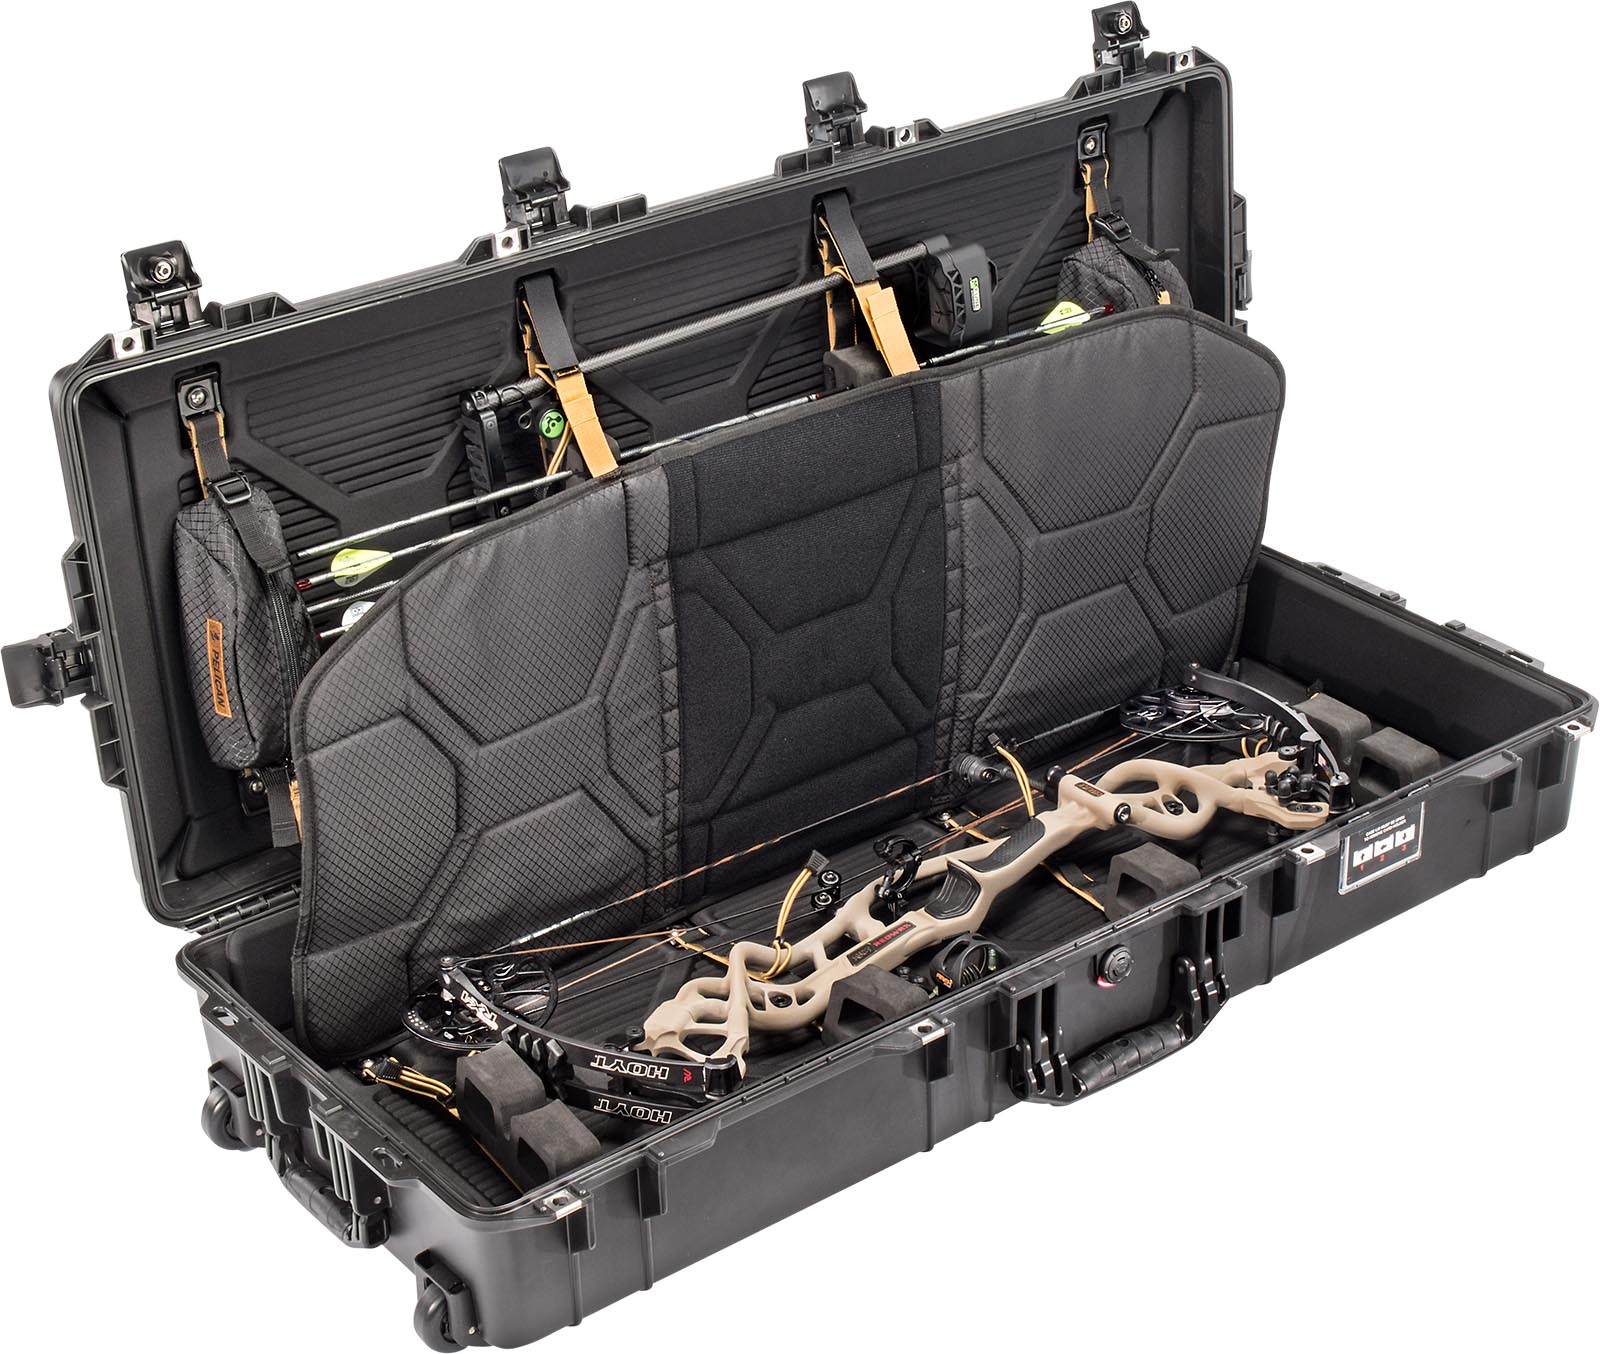 pelican air 1745bow hunting archery case